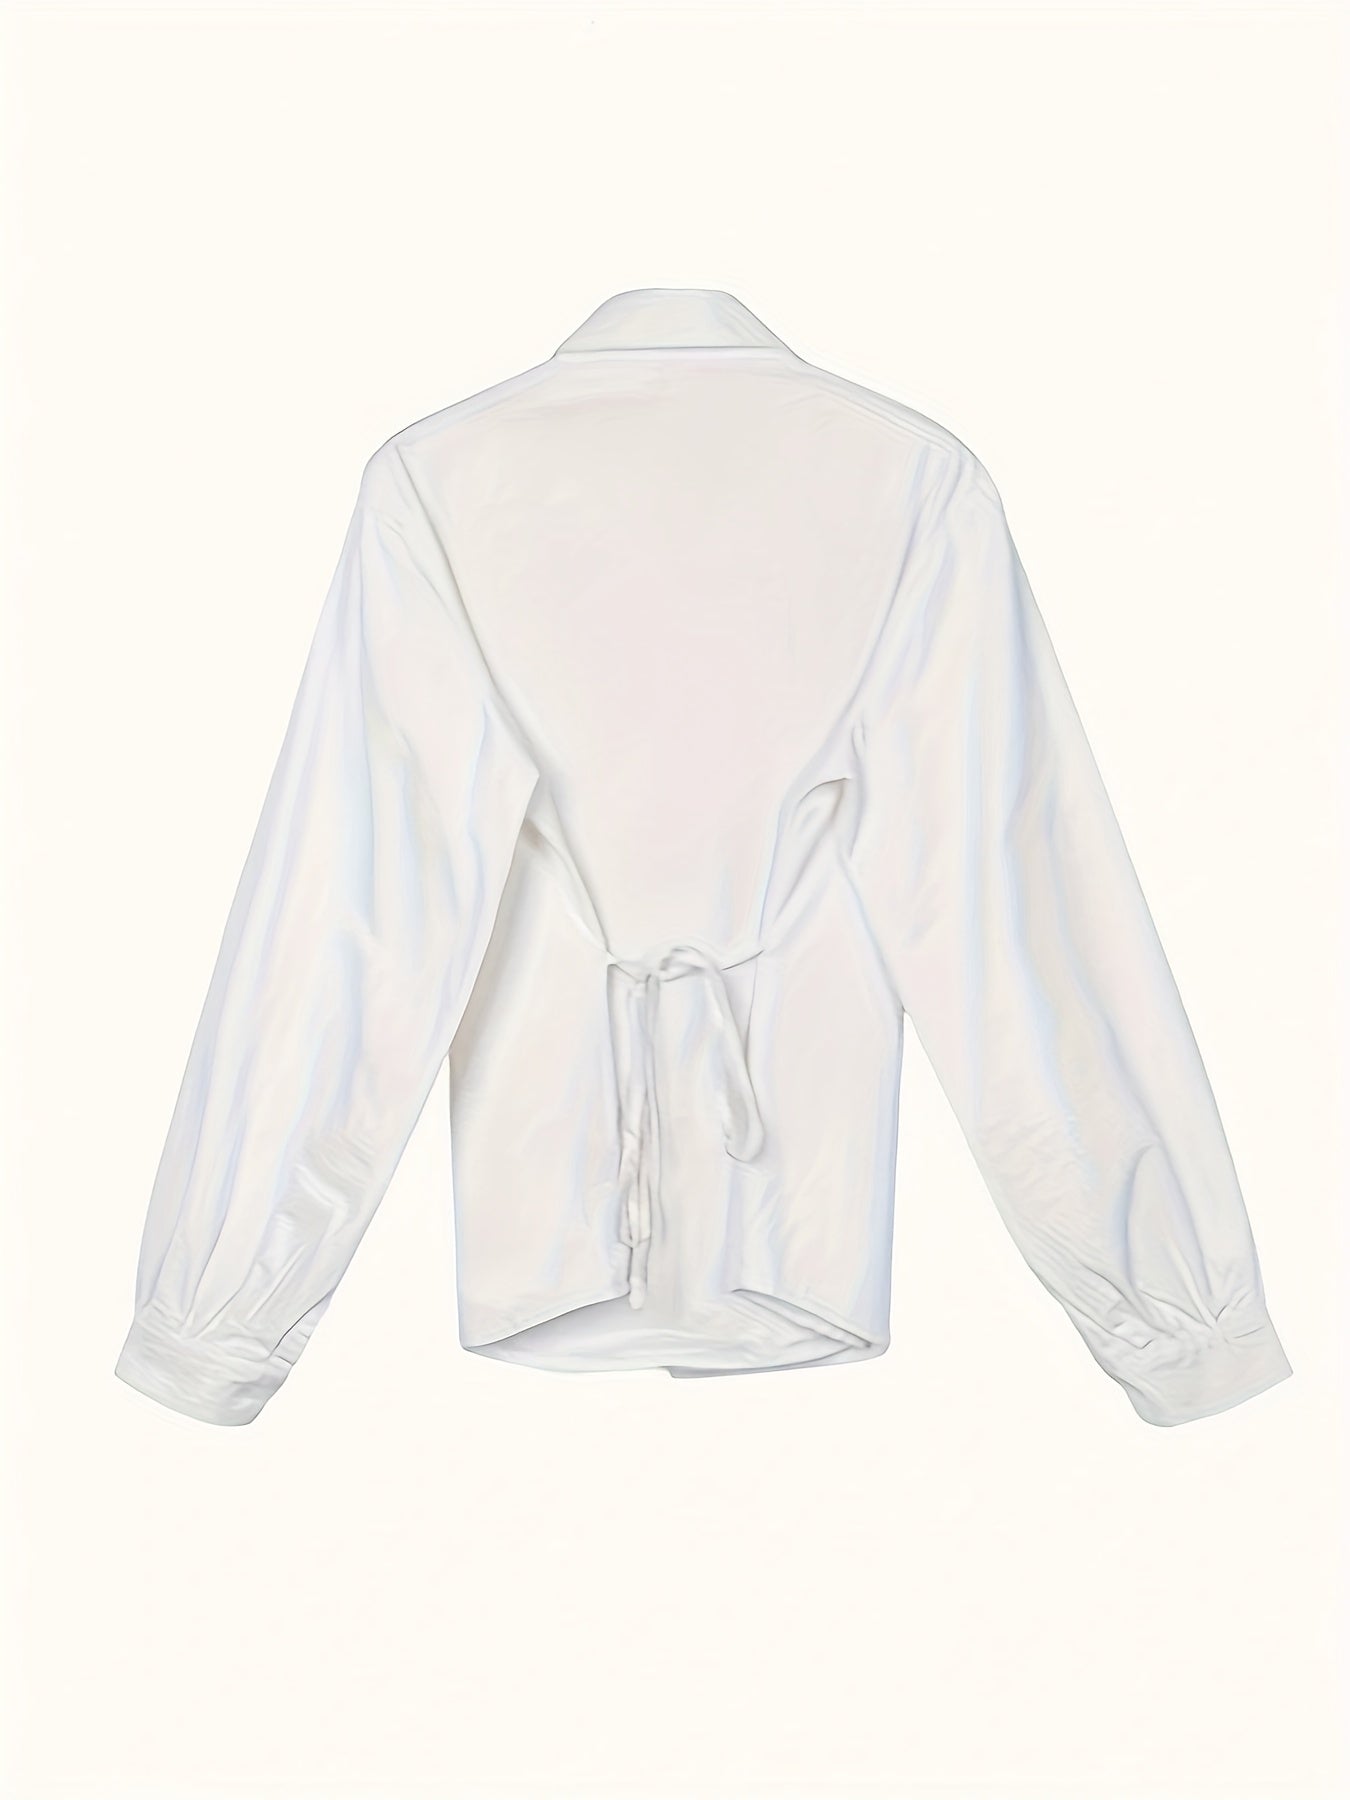 Antmvs Solid Cross Tie Blouse, Casual Long Sleeve Blouse For Spring & Fall, Women's Clothing